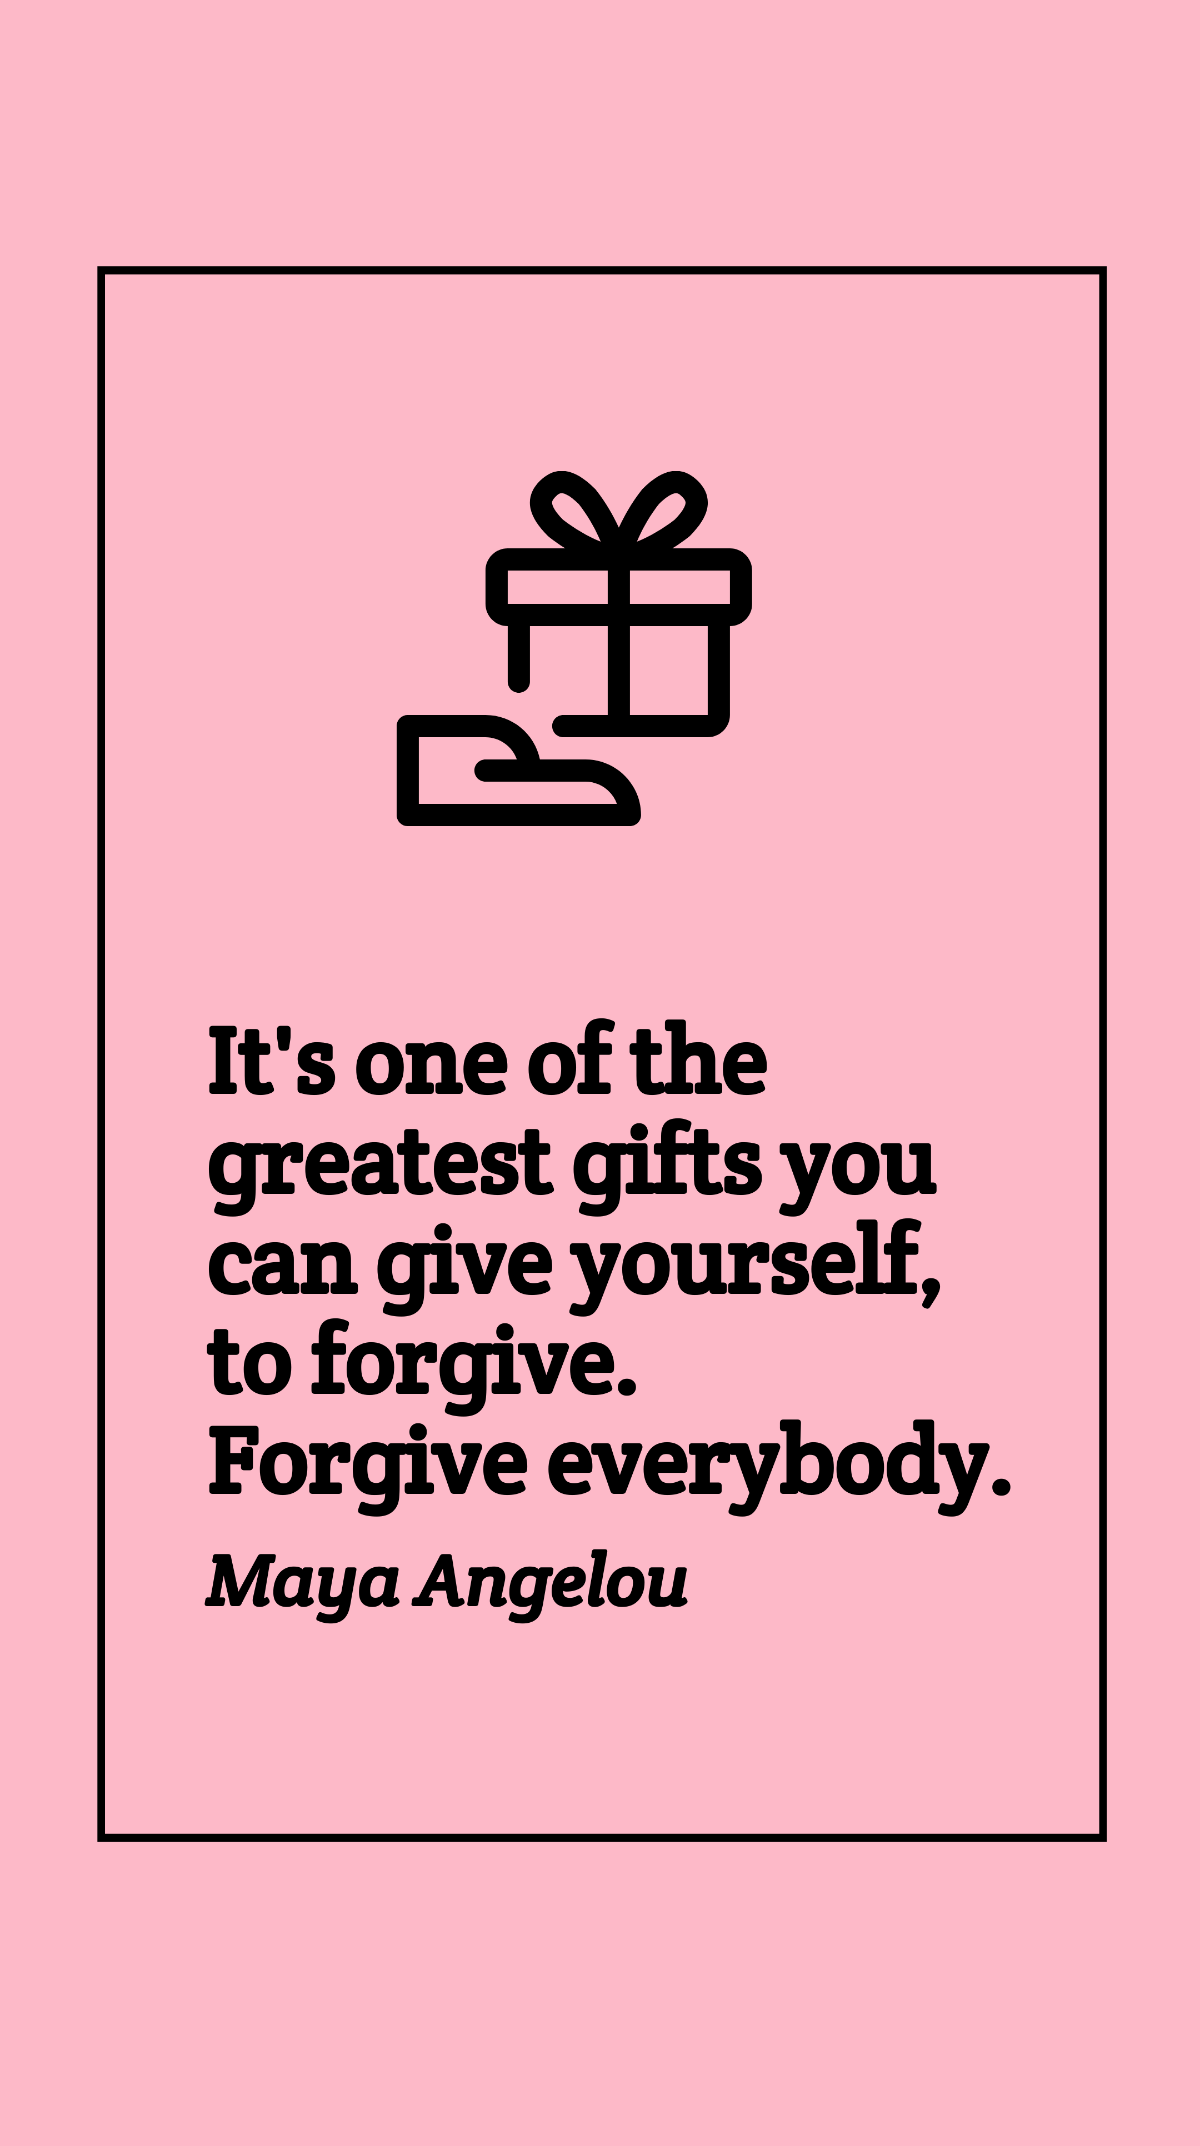 Free Maya Angelou - It's one of the greatest gifts you can give yourself, to forgive. Forgive everybody. Template